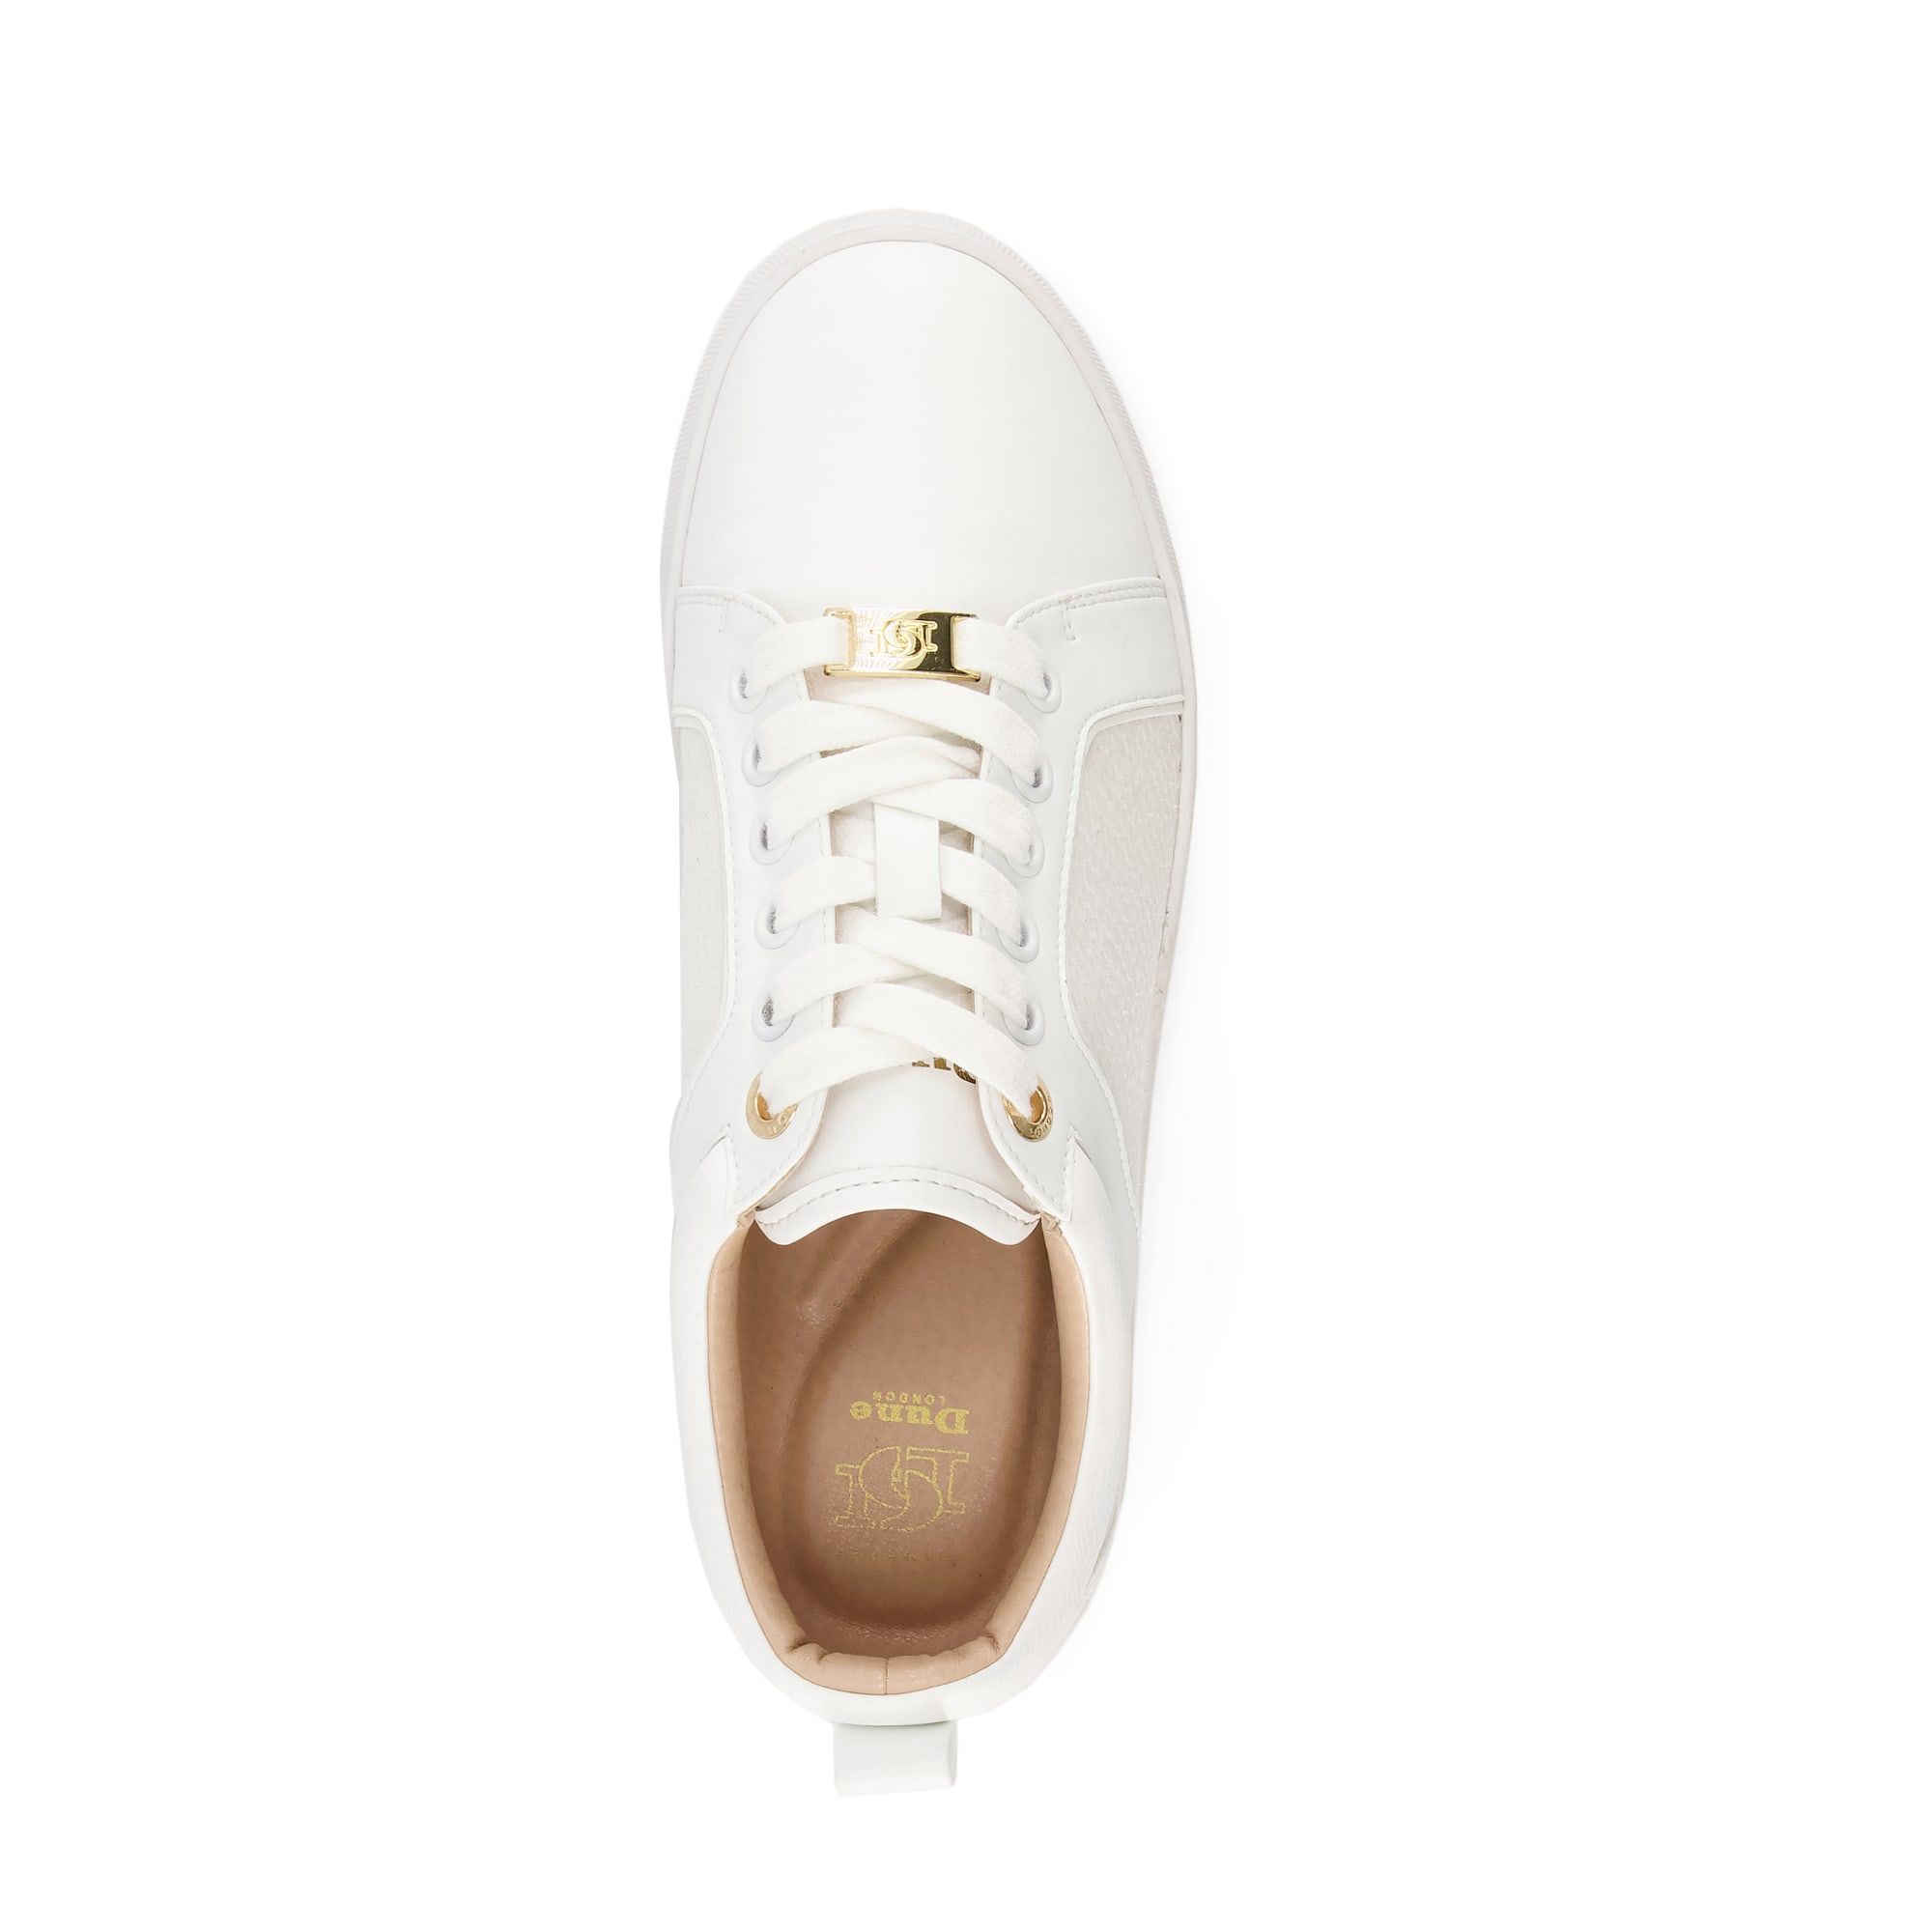 Featuring a chunky sole, comfortable round toe and lace-up fastening. These mix material trainers will add instant interest to you casual looks. The wide fit collection offers that extra space for your feet to breathe.